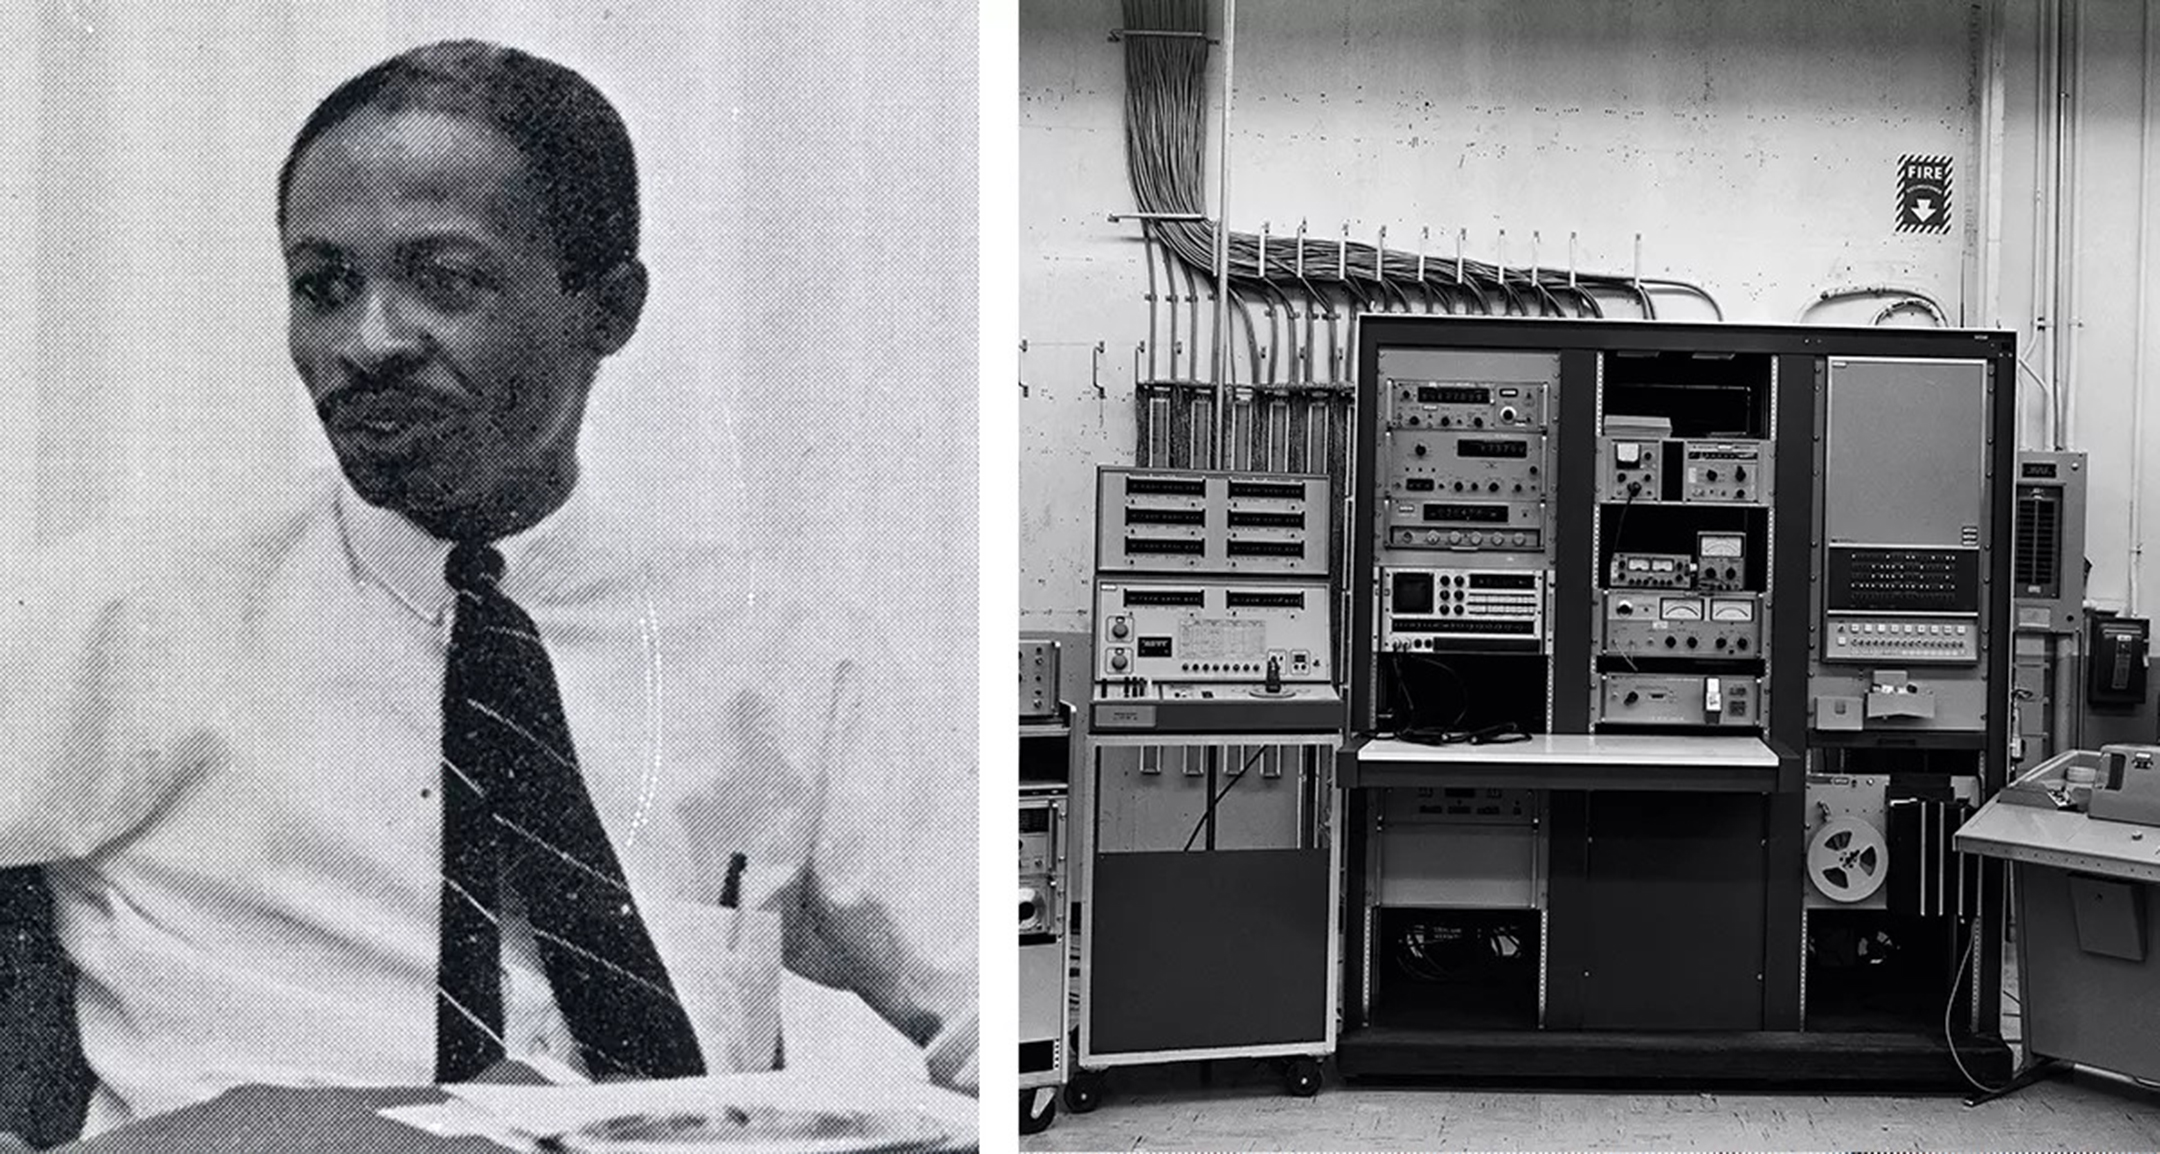 Black and white photo of Roy Clay on the left, black and white photo of an old computer on the right